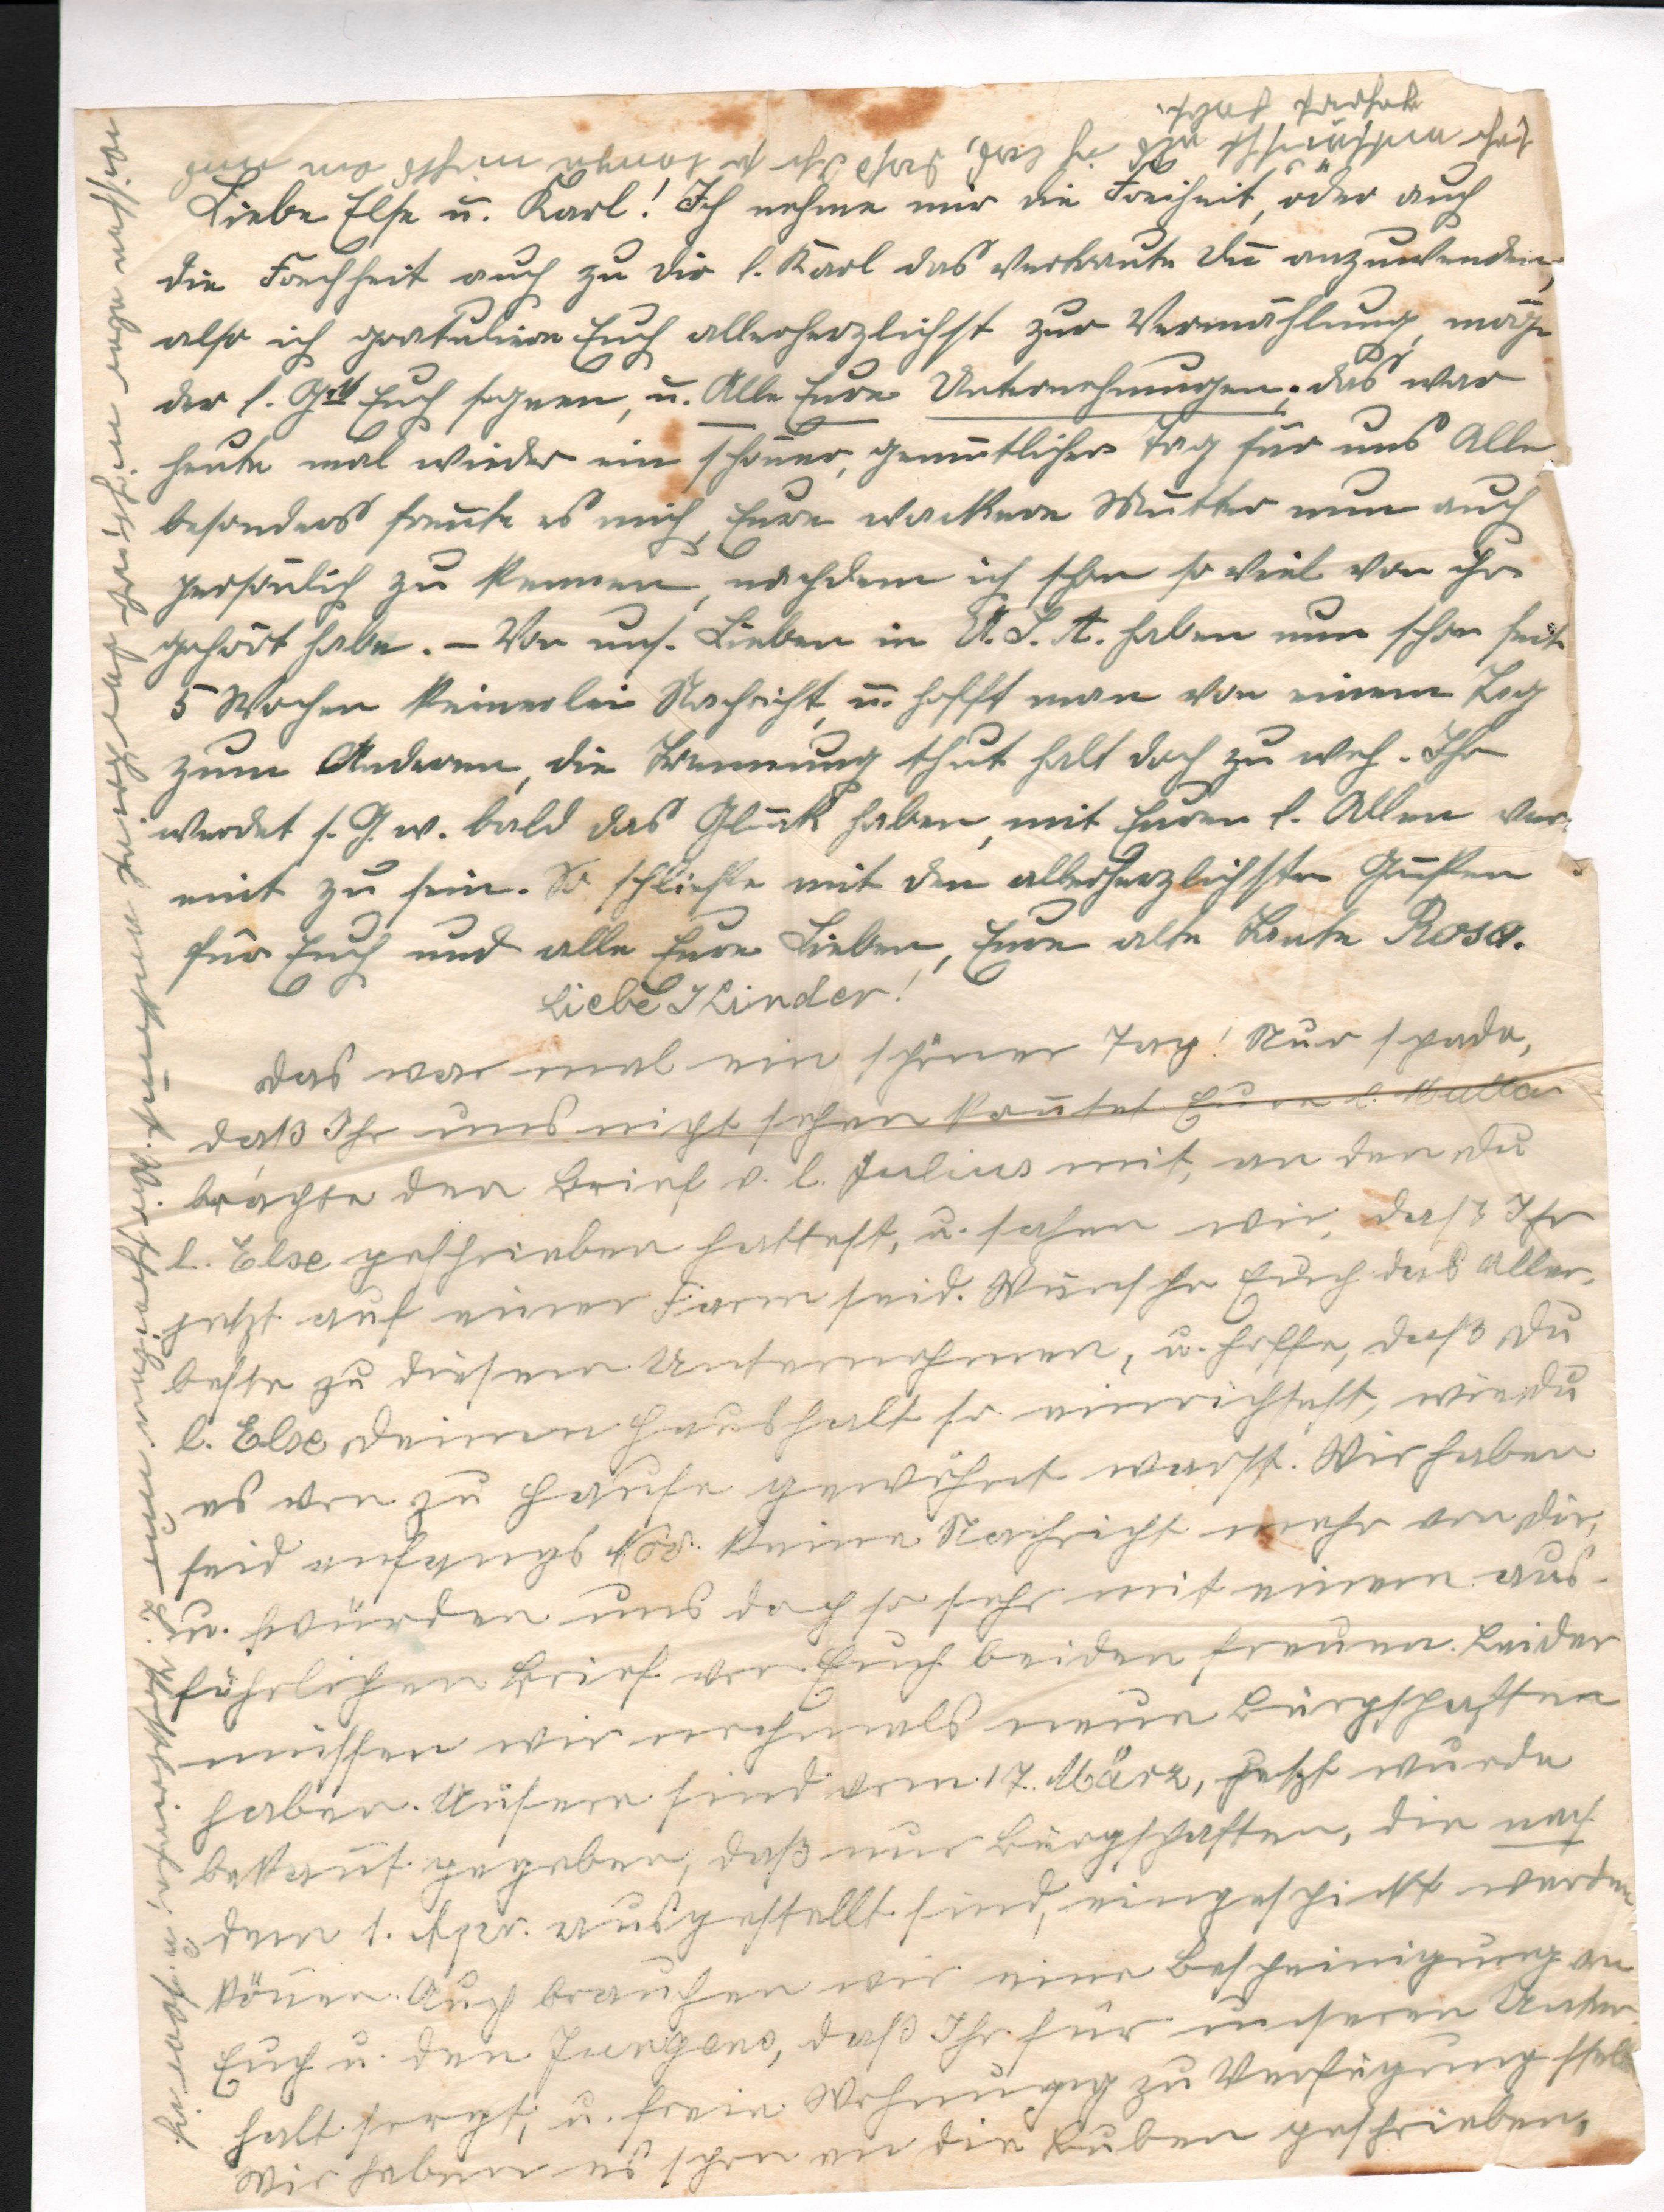 Elsie's letter from parents before their deportation '41 - Part 5